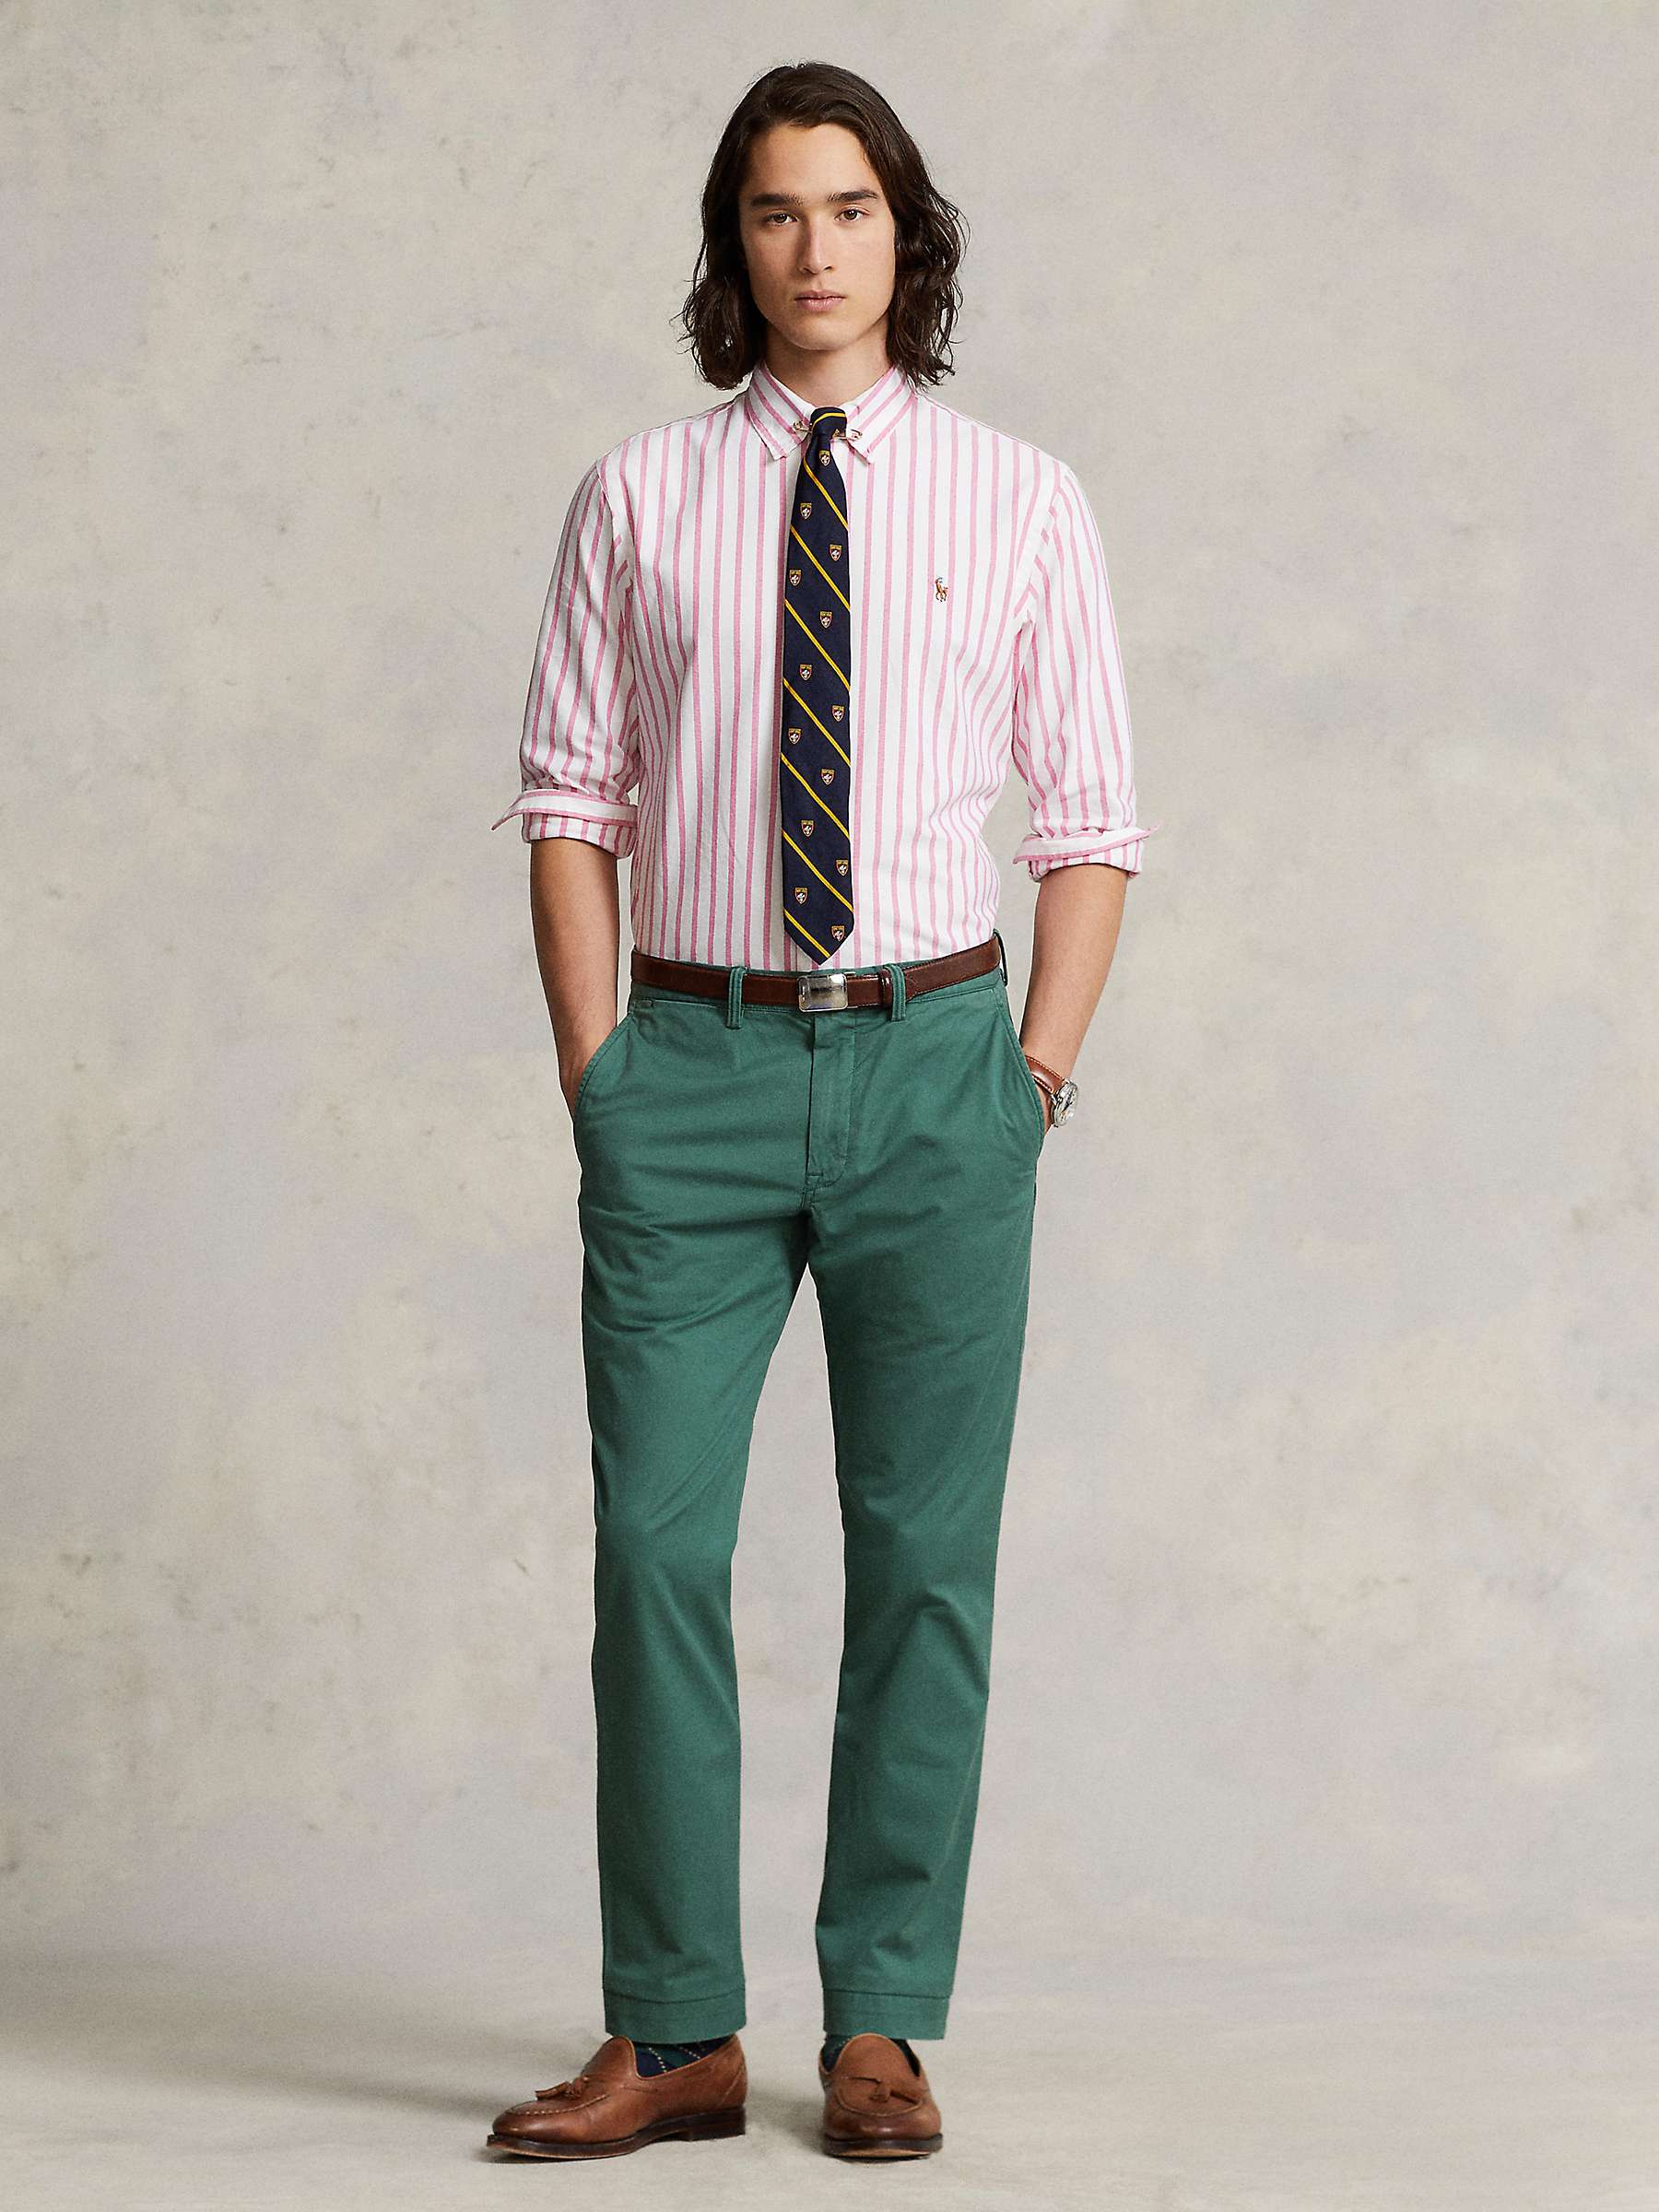 Buy Polo Ralph Lauren Custom Fit Striped Oxford Shirt, Pink/White Online at johnlewis.com